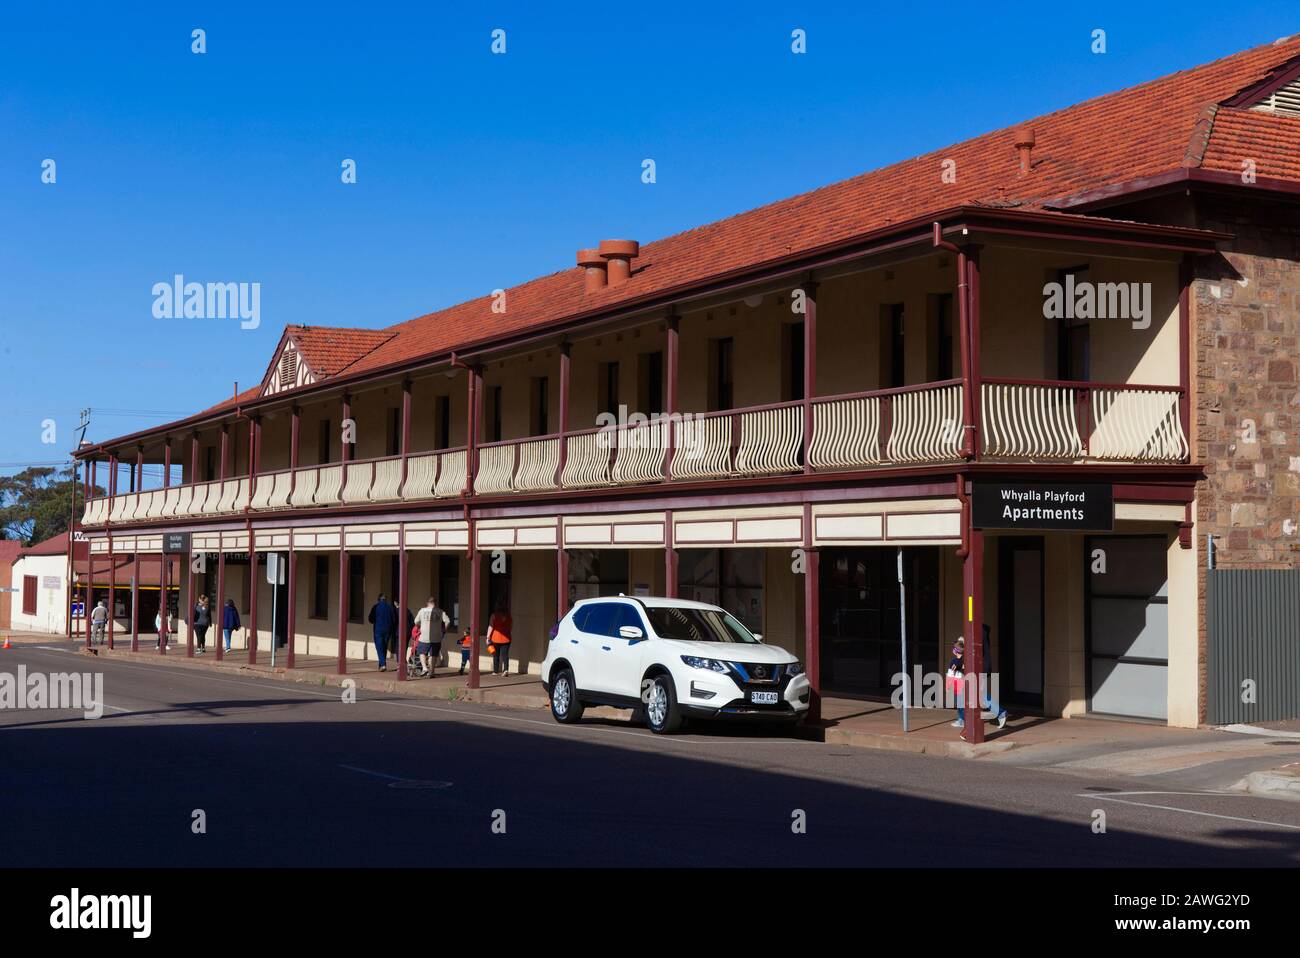 Shady verandas adorn the Playford Apartments building on Darling Terrace Whyalla South Australia Stock Photo